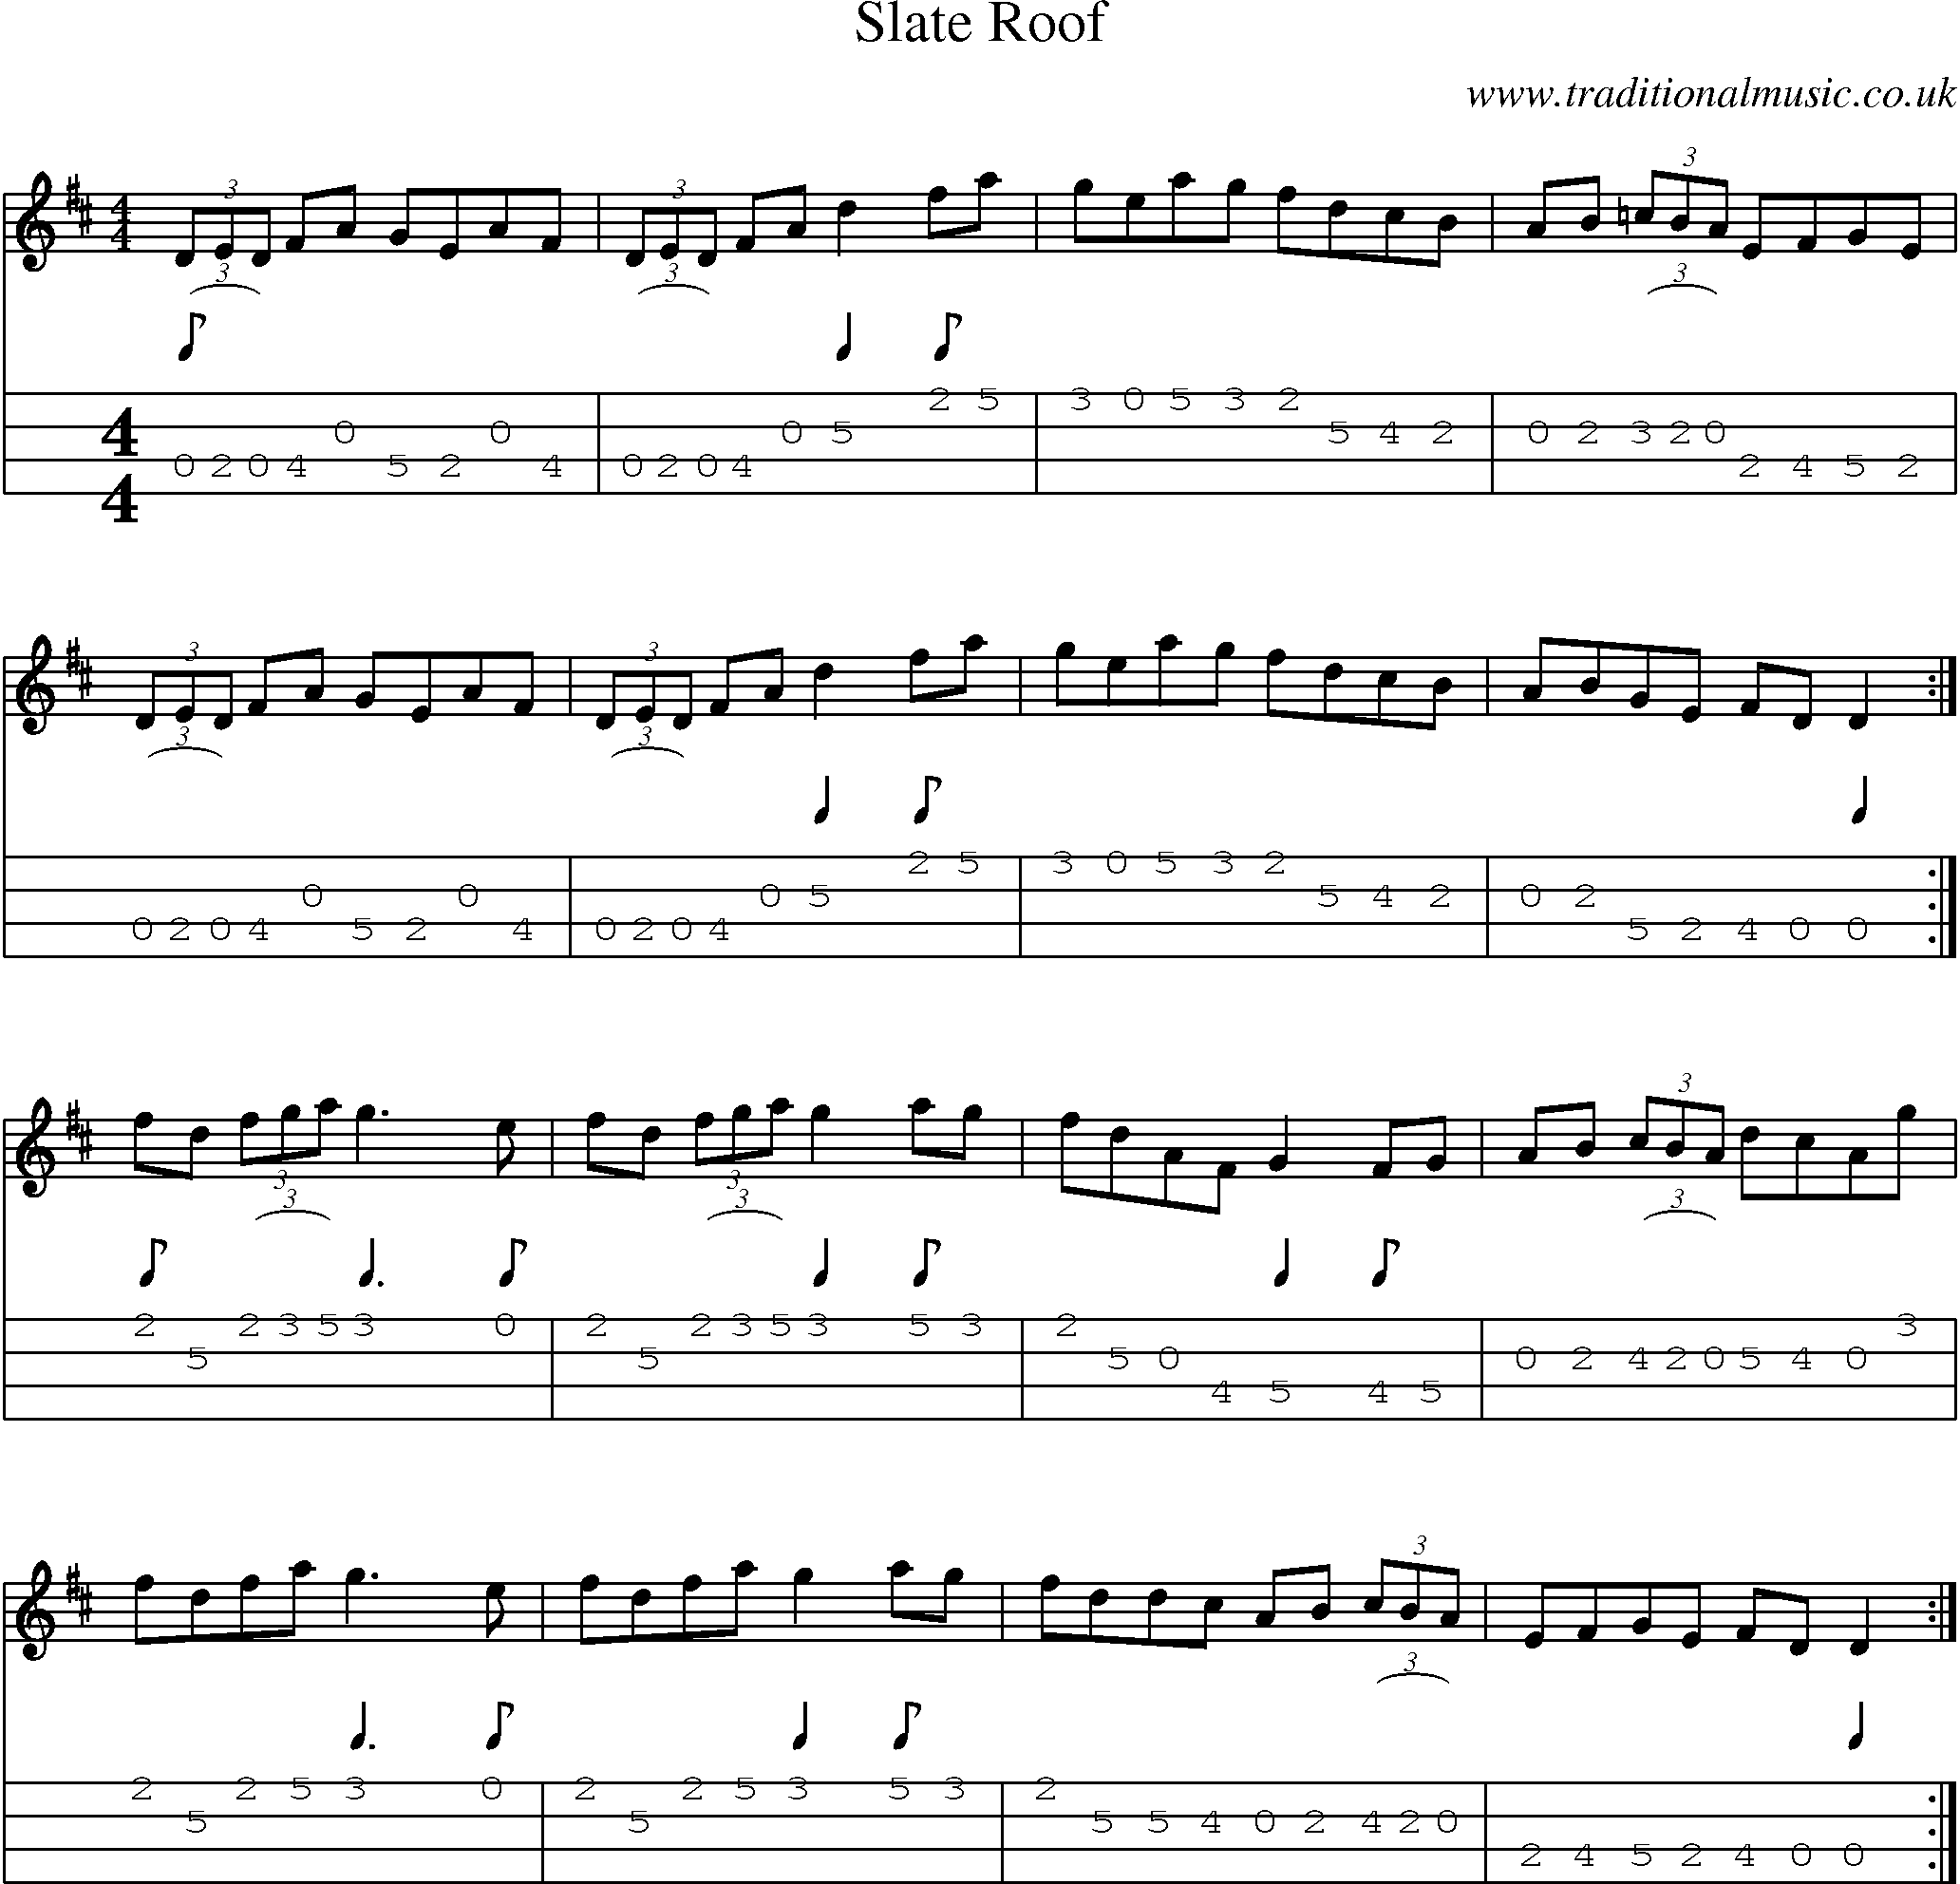 Music Score and Mandolin Tabs for Slate Roof